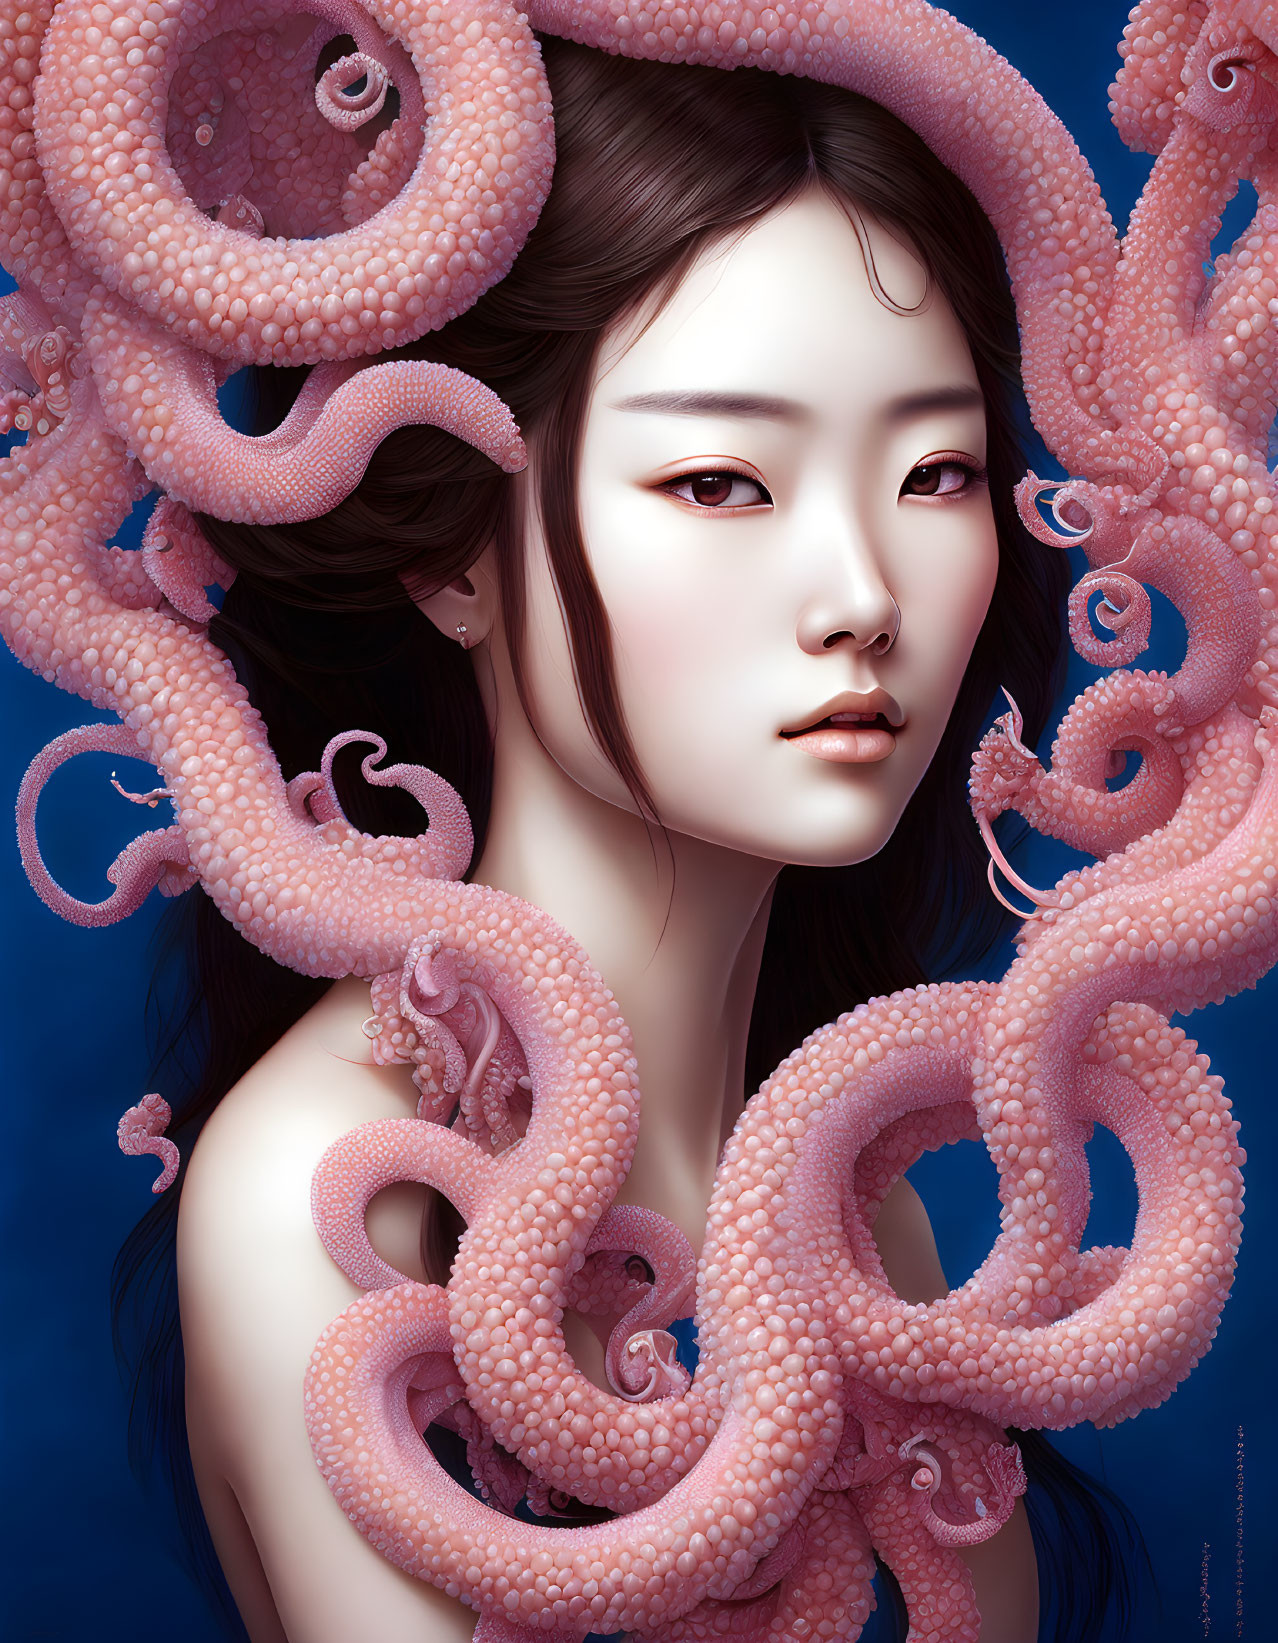 Portrait of woman with pale skin, dark hair, pink makeup, surrounded by pink octopus tentacles